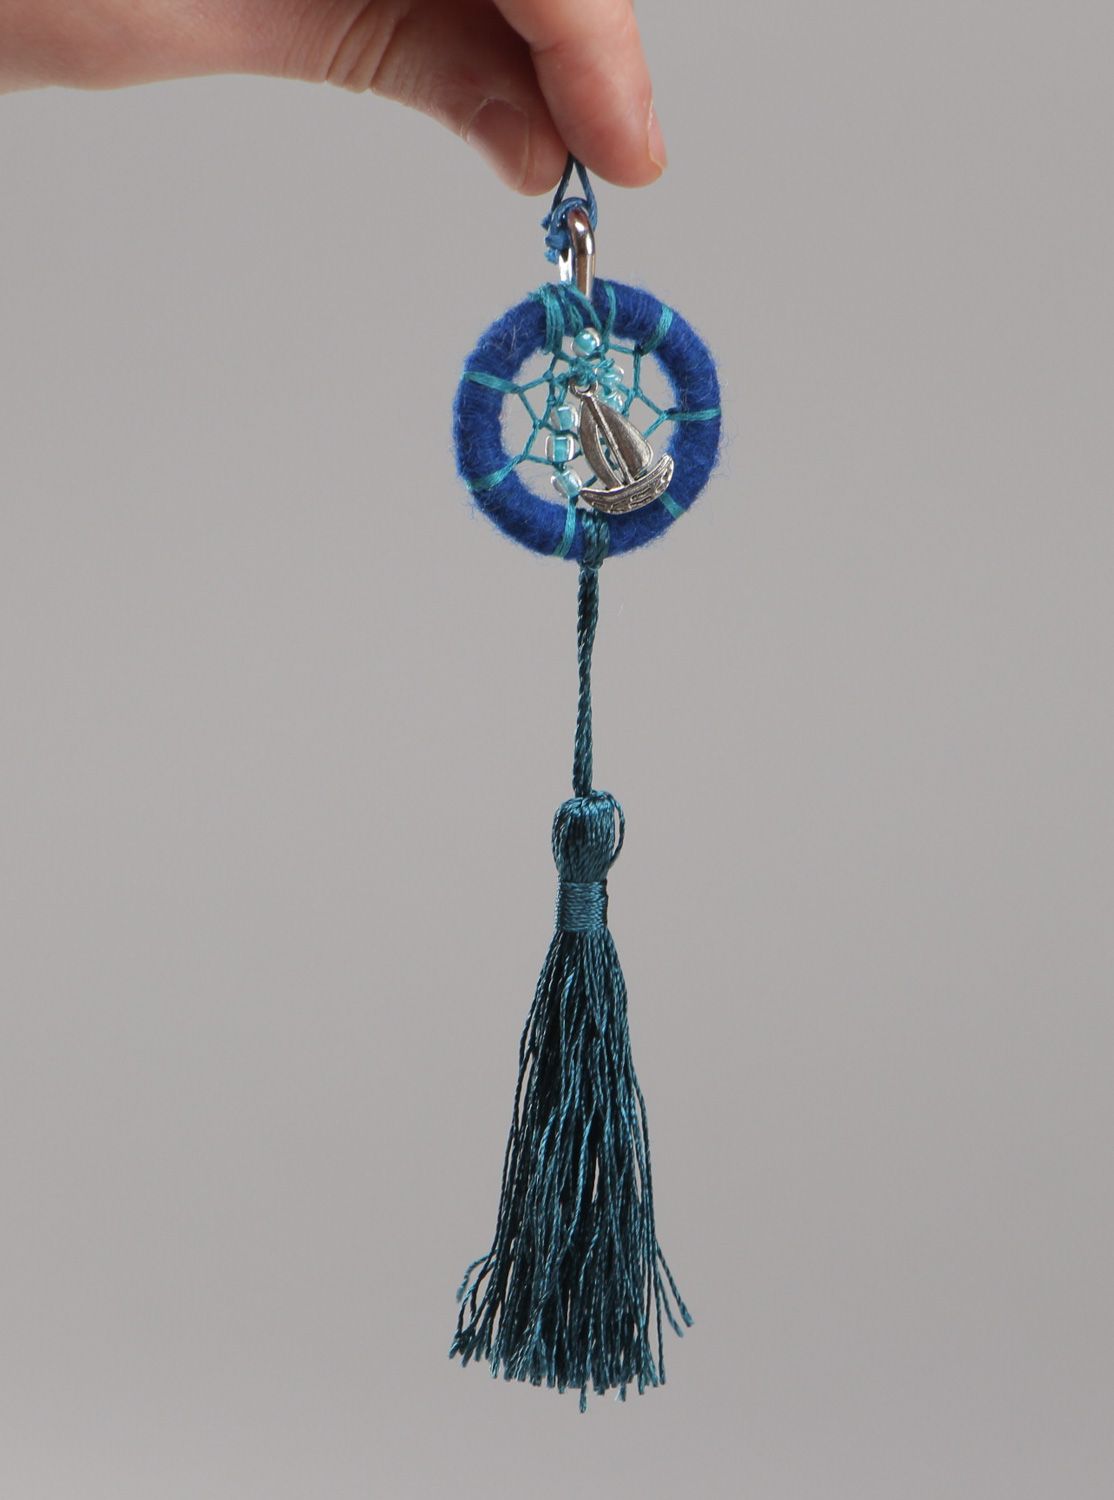 Handmade Native American dreamcatcher pendant necklace in blue color with tassel photo 5